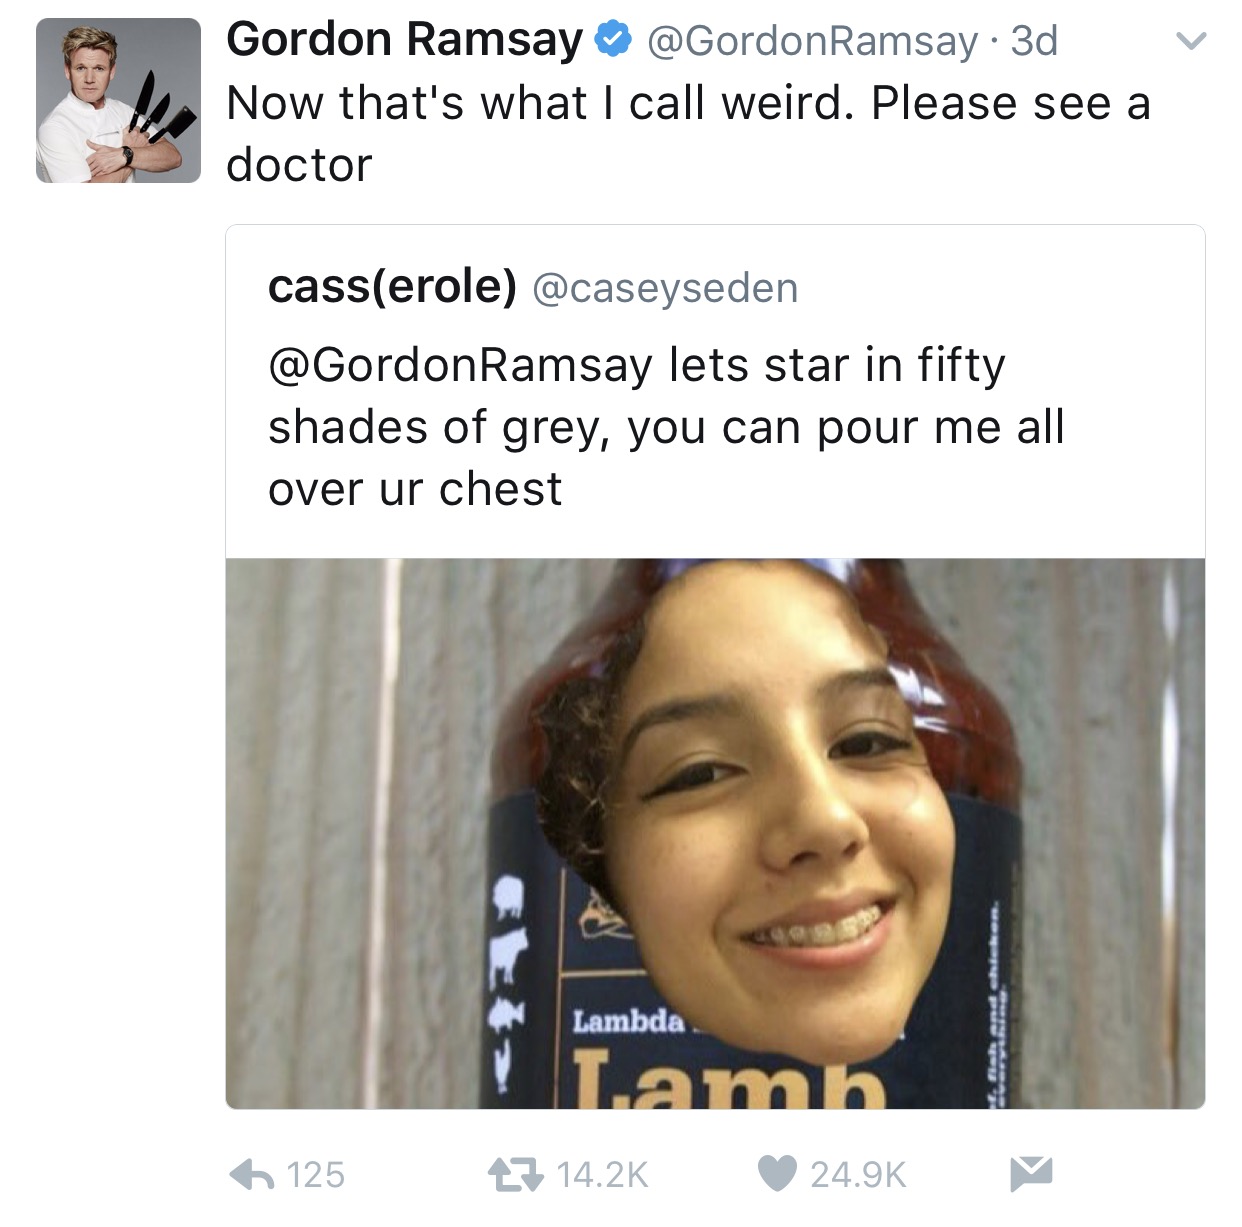 tweet - conor mcgregor baby meme - Gordon Ramsay Ramsay 3d Now that's what I call weird. Please see a doctor casserole Ramsay lets star in fifty shades of grey, you can pour me all over ur chest Lambda T.am 6 125 27 V